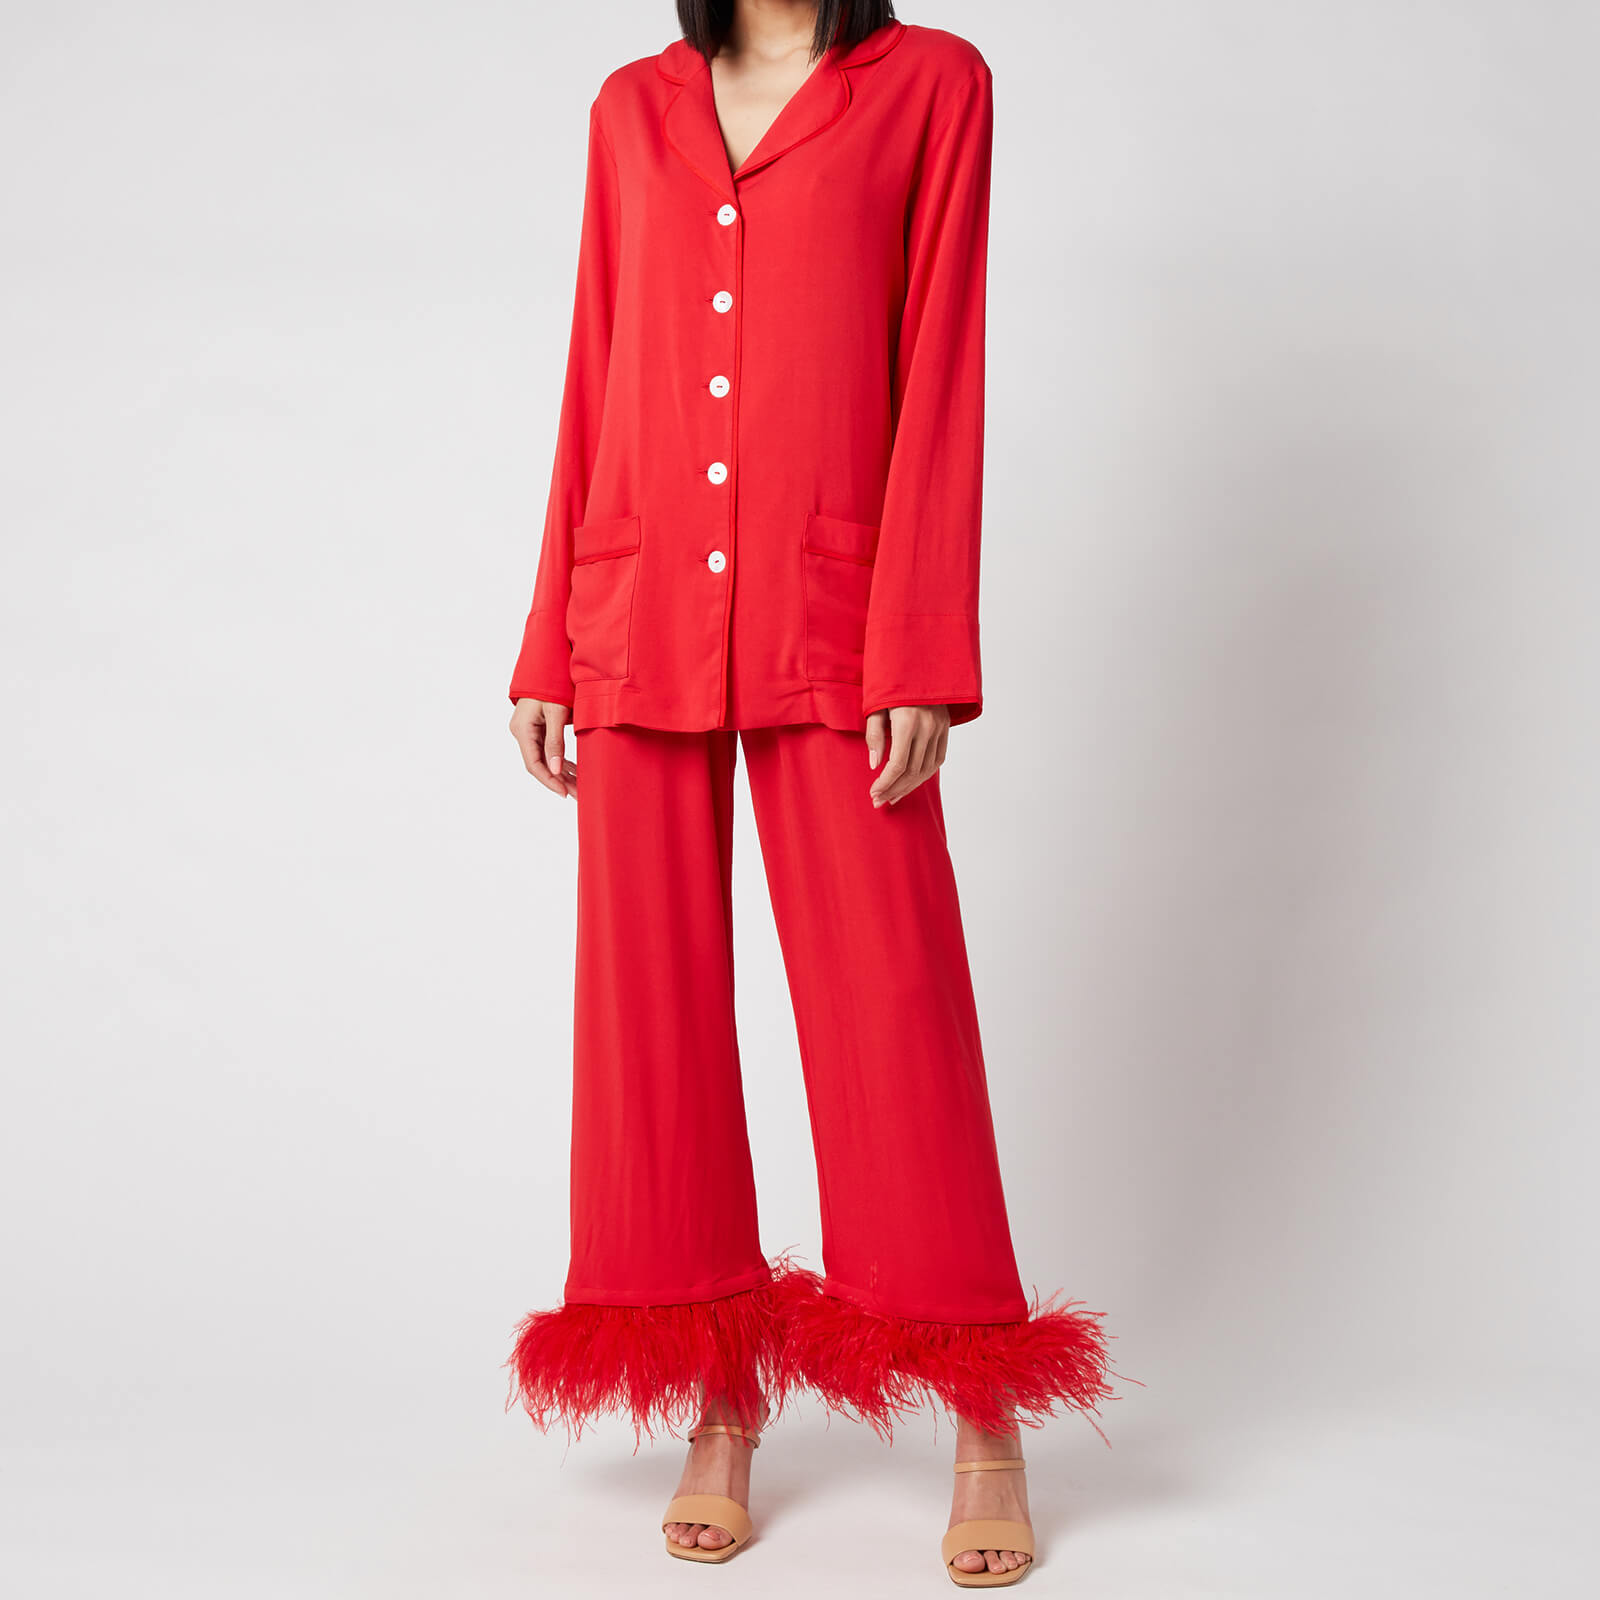 Sleeper Women's Party Pyjama Set with Feathers - Red - M